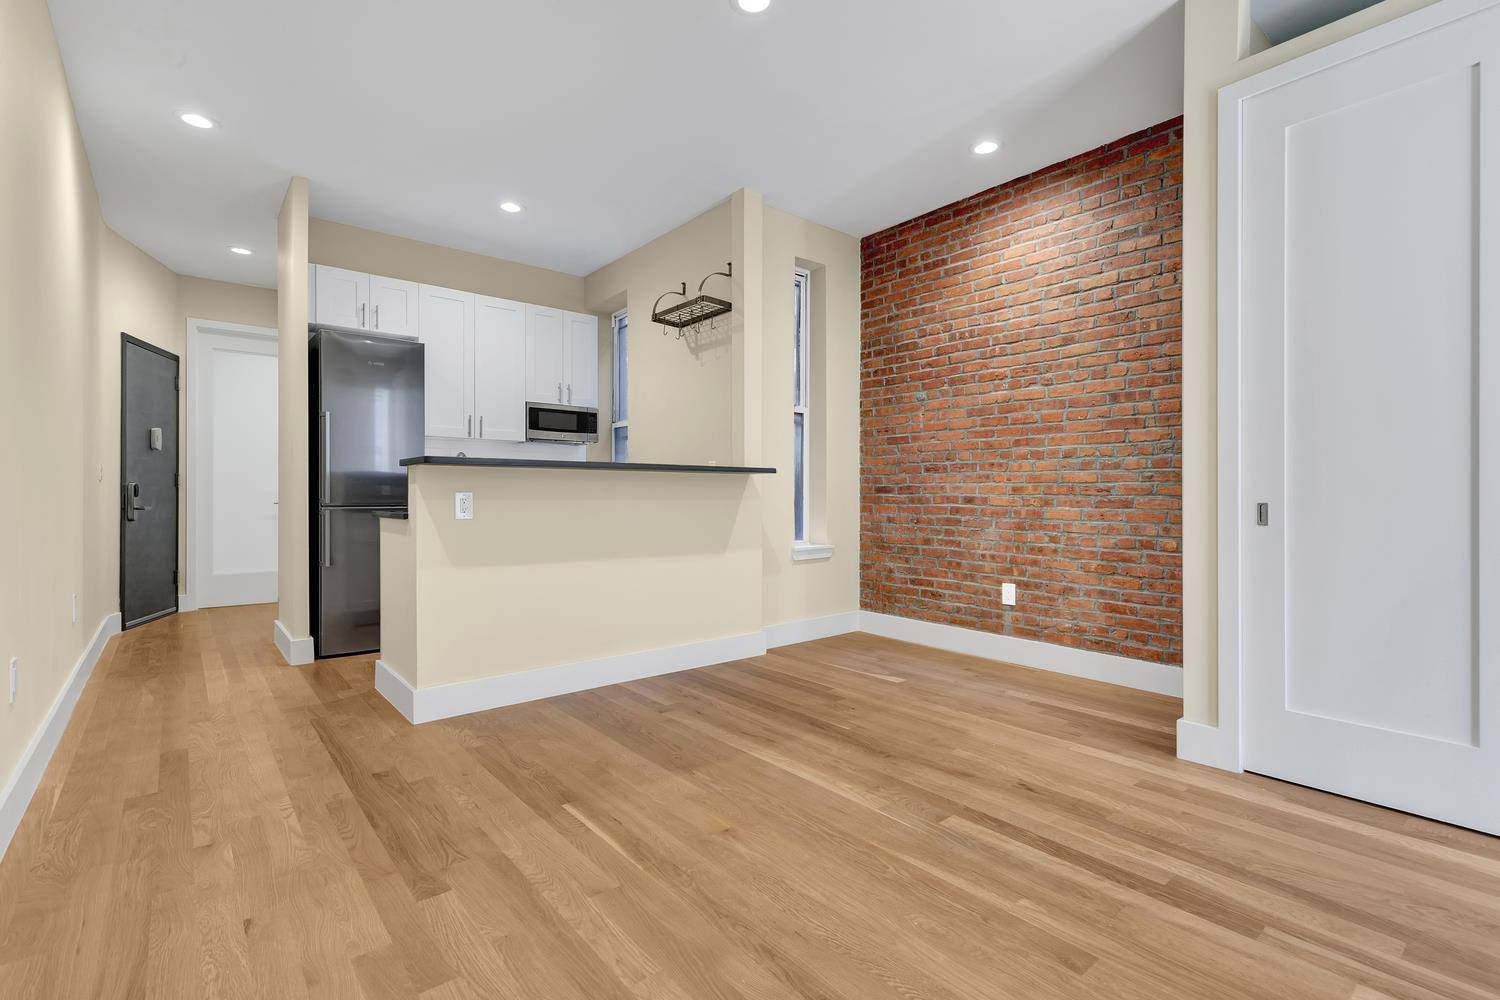 STUNNING HOME W CONDO QUALITY FINISHESCYOFABOUT APT 5H LG Washer Dryer Combo, Wall Mounted Fujitsu Air Conditioning amp ; Heating Units w Remote Control, Spacious Living Room, Exposed Brick Throughout, ...